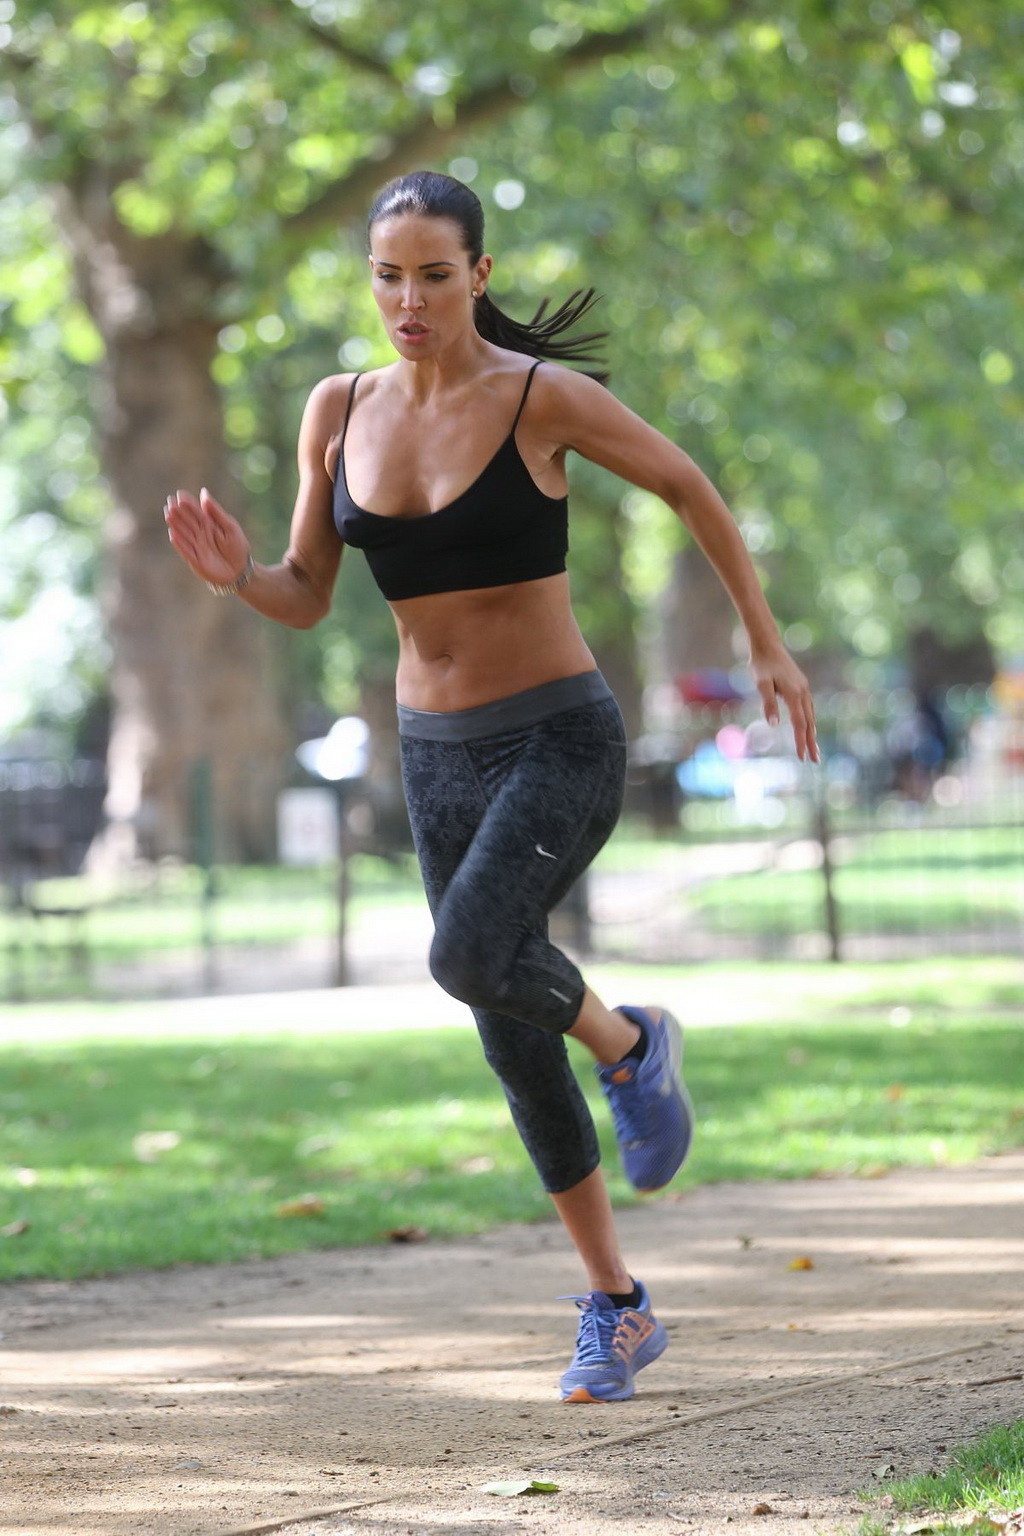 Sophie Anderton showing pokies and ass while workout in a sports bra and tights #75186127